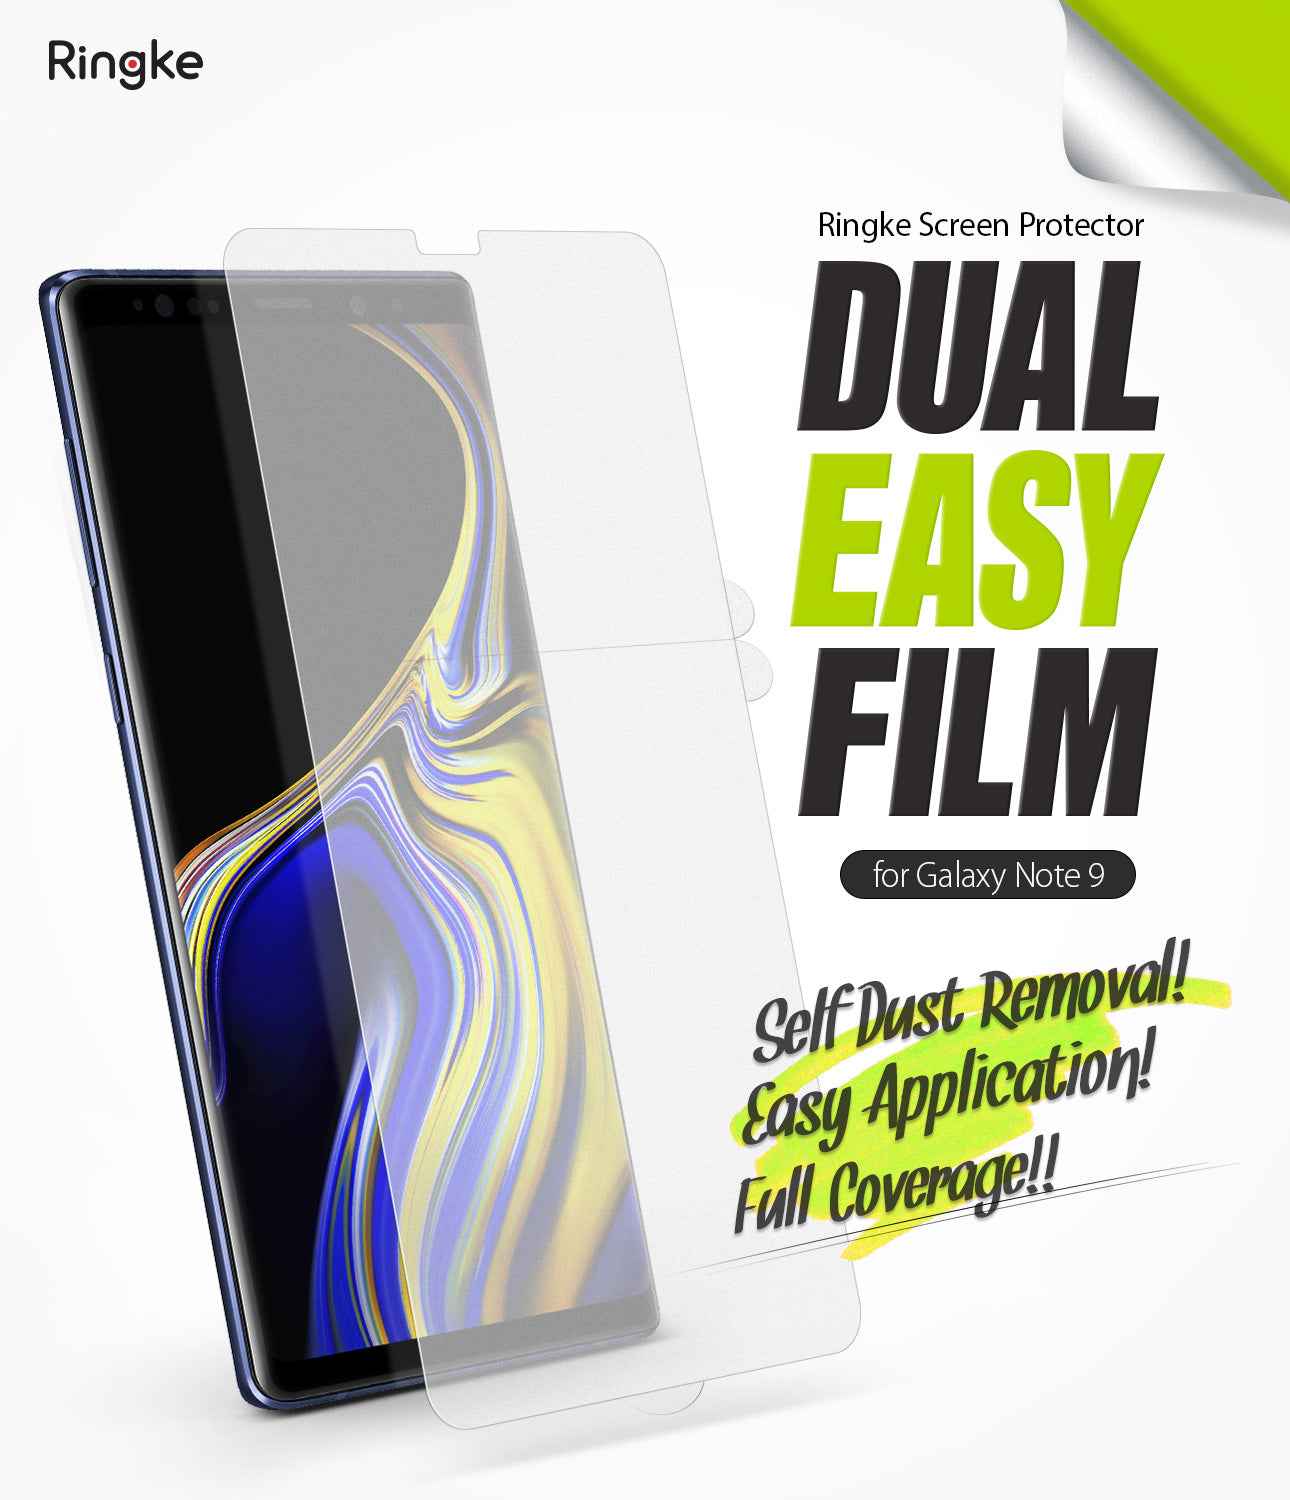 Galaxy Note 9 Screen Protector | Dual Easy - By Ringke